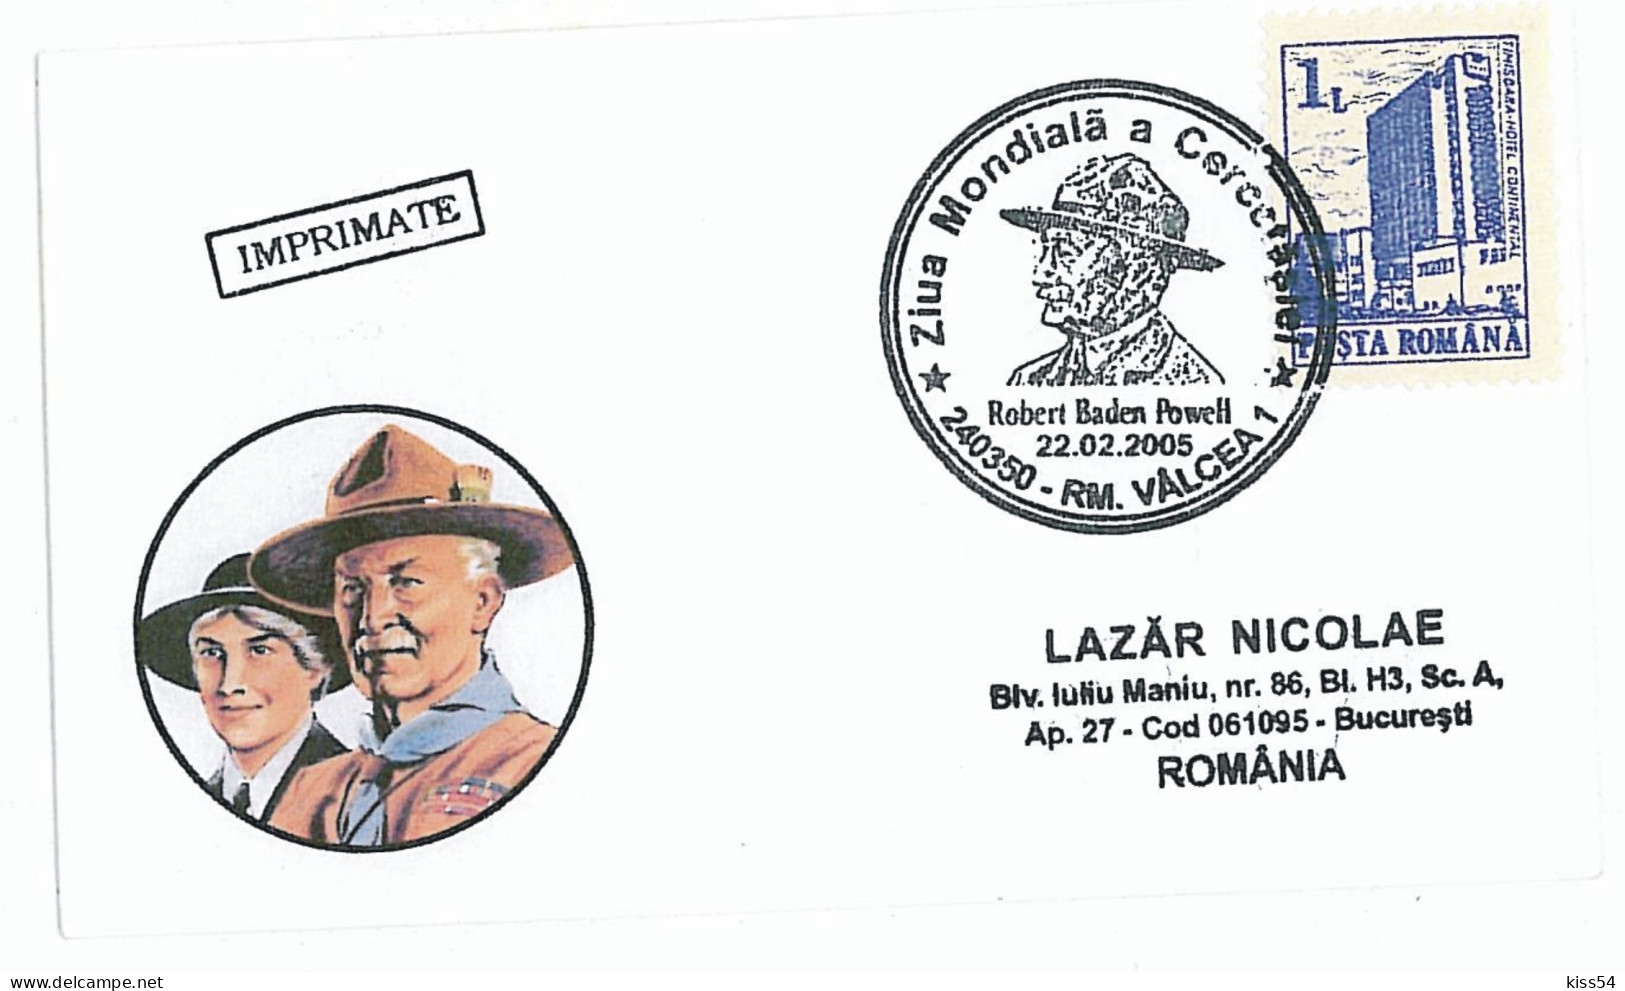 SC 06 - 1111 SCOUT, Robert BADEN POWELL, Romania - Lilliput Cover  - Used - 2005 - Covers & Documents